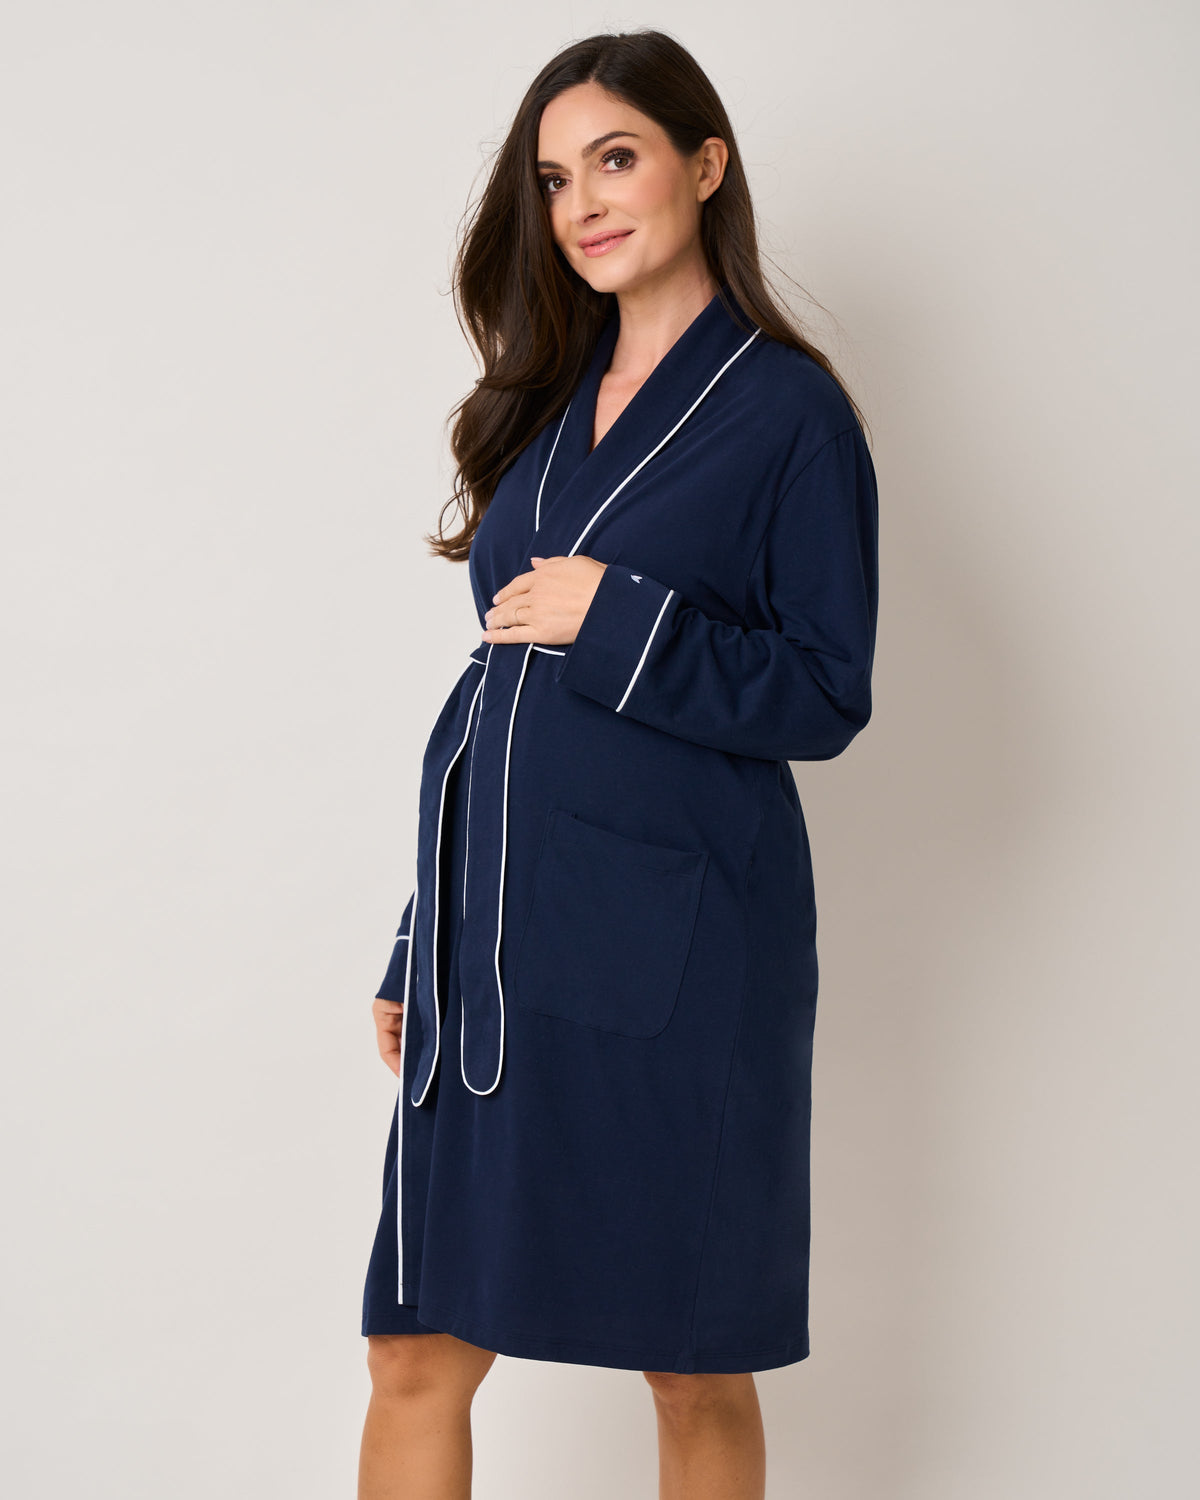 The Hospital Stay Luxe Set in Navy & Navy Stripe